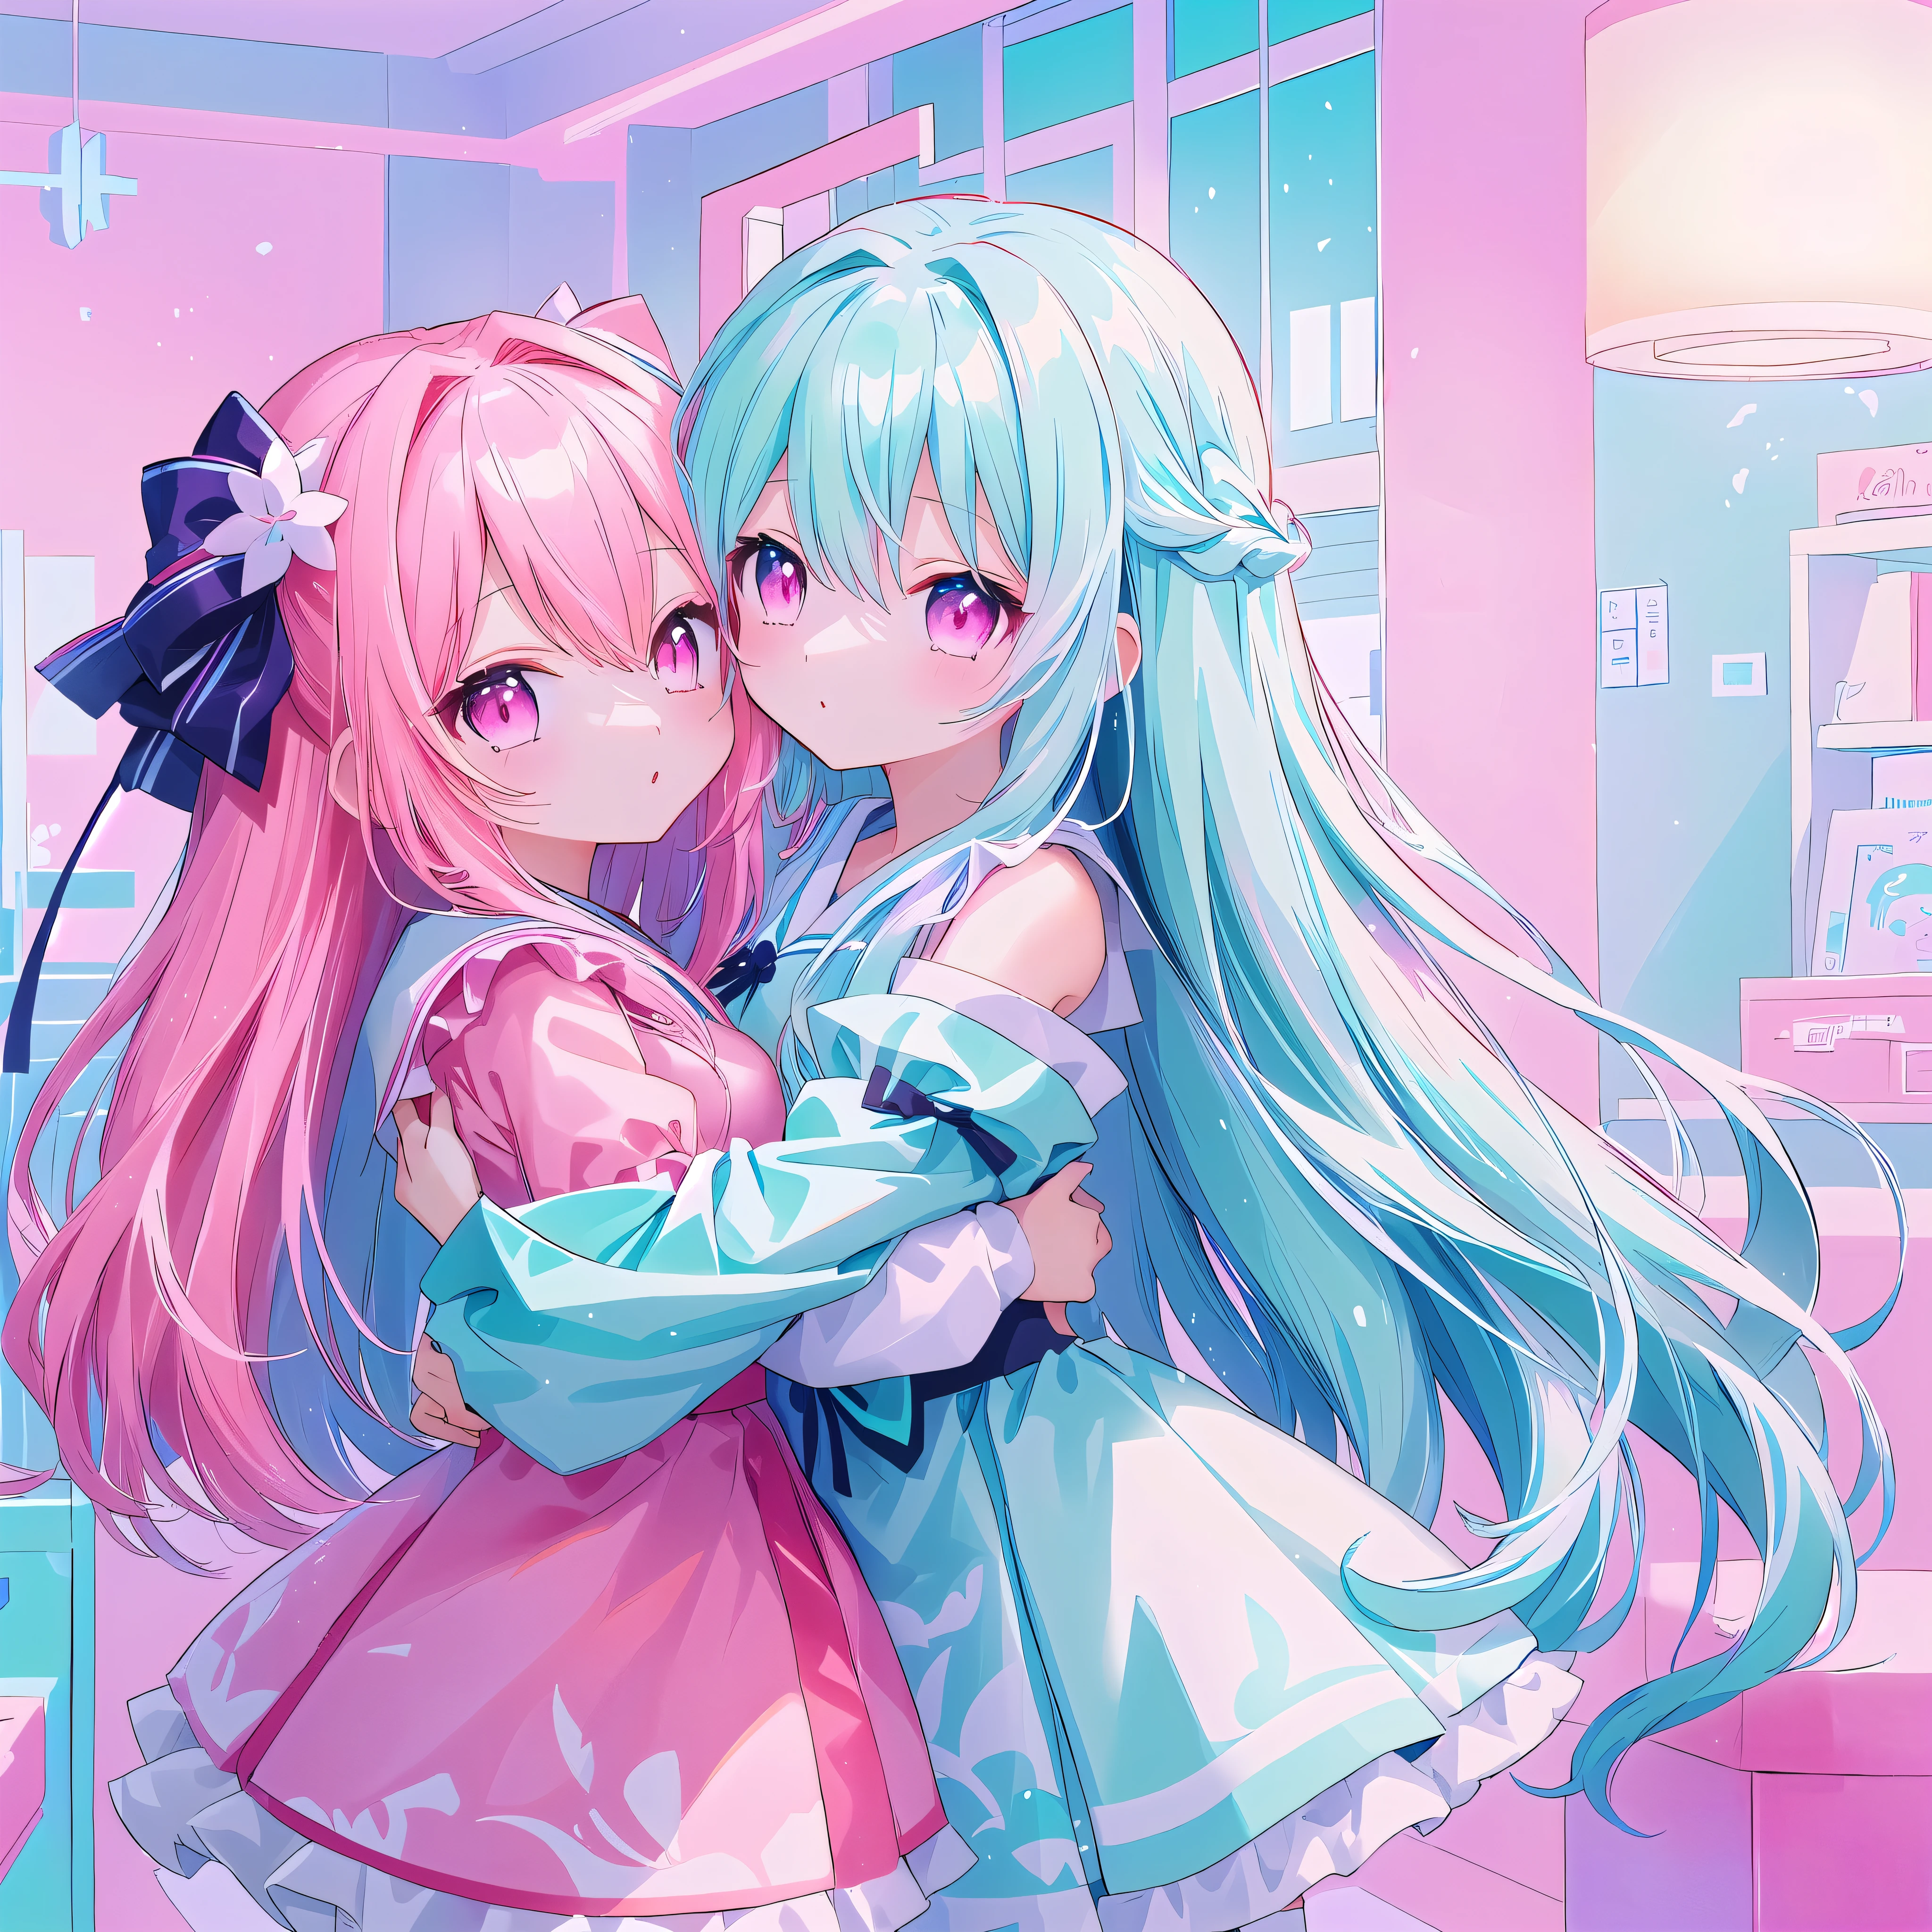 Anime girl hugging another girl in the room with pink background, Two beautiful anime girls, Anime style 4-color double tail hair and cyan eyes, Vermillion and Cyan, anime art wallpaper 8 k, Digital art on pixiv, Double tail, Lovely art style, Cyan and Magenta, Anime Art Wallpaper 4K, Anime Art Wallpaper 4K